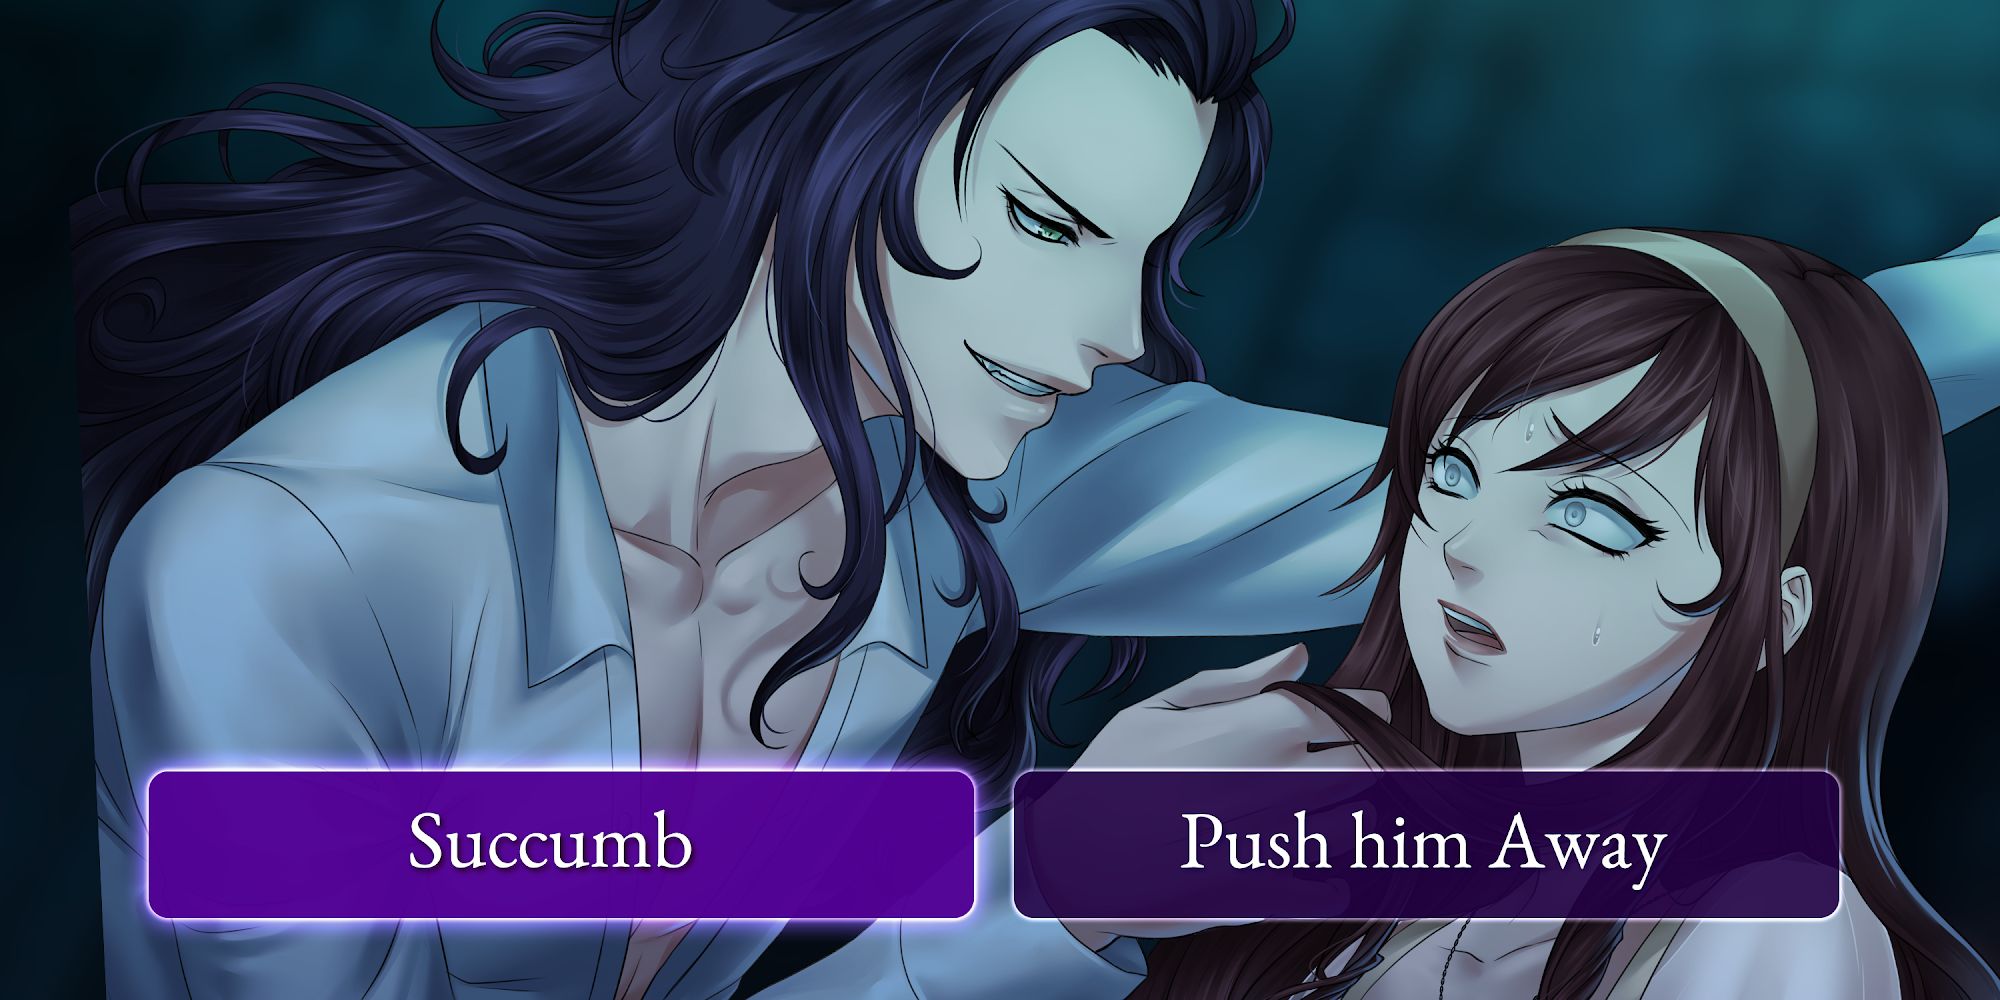 Moonlight Lovers : Beliath - dating sim / Vampire for Android